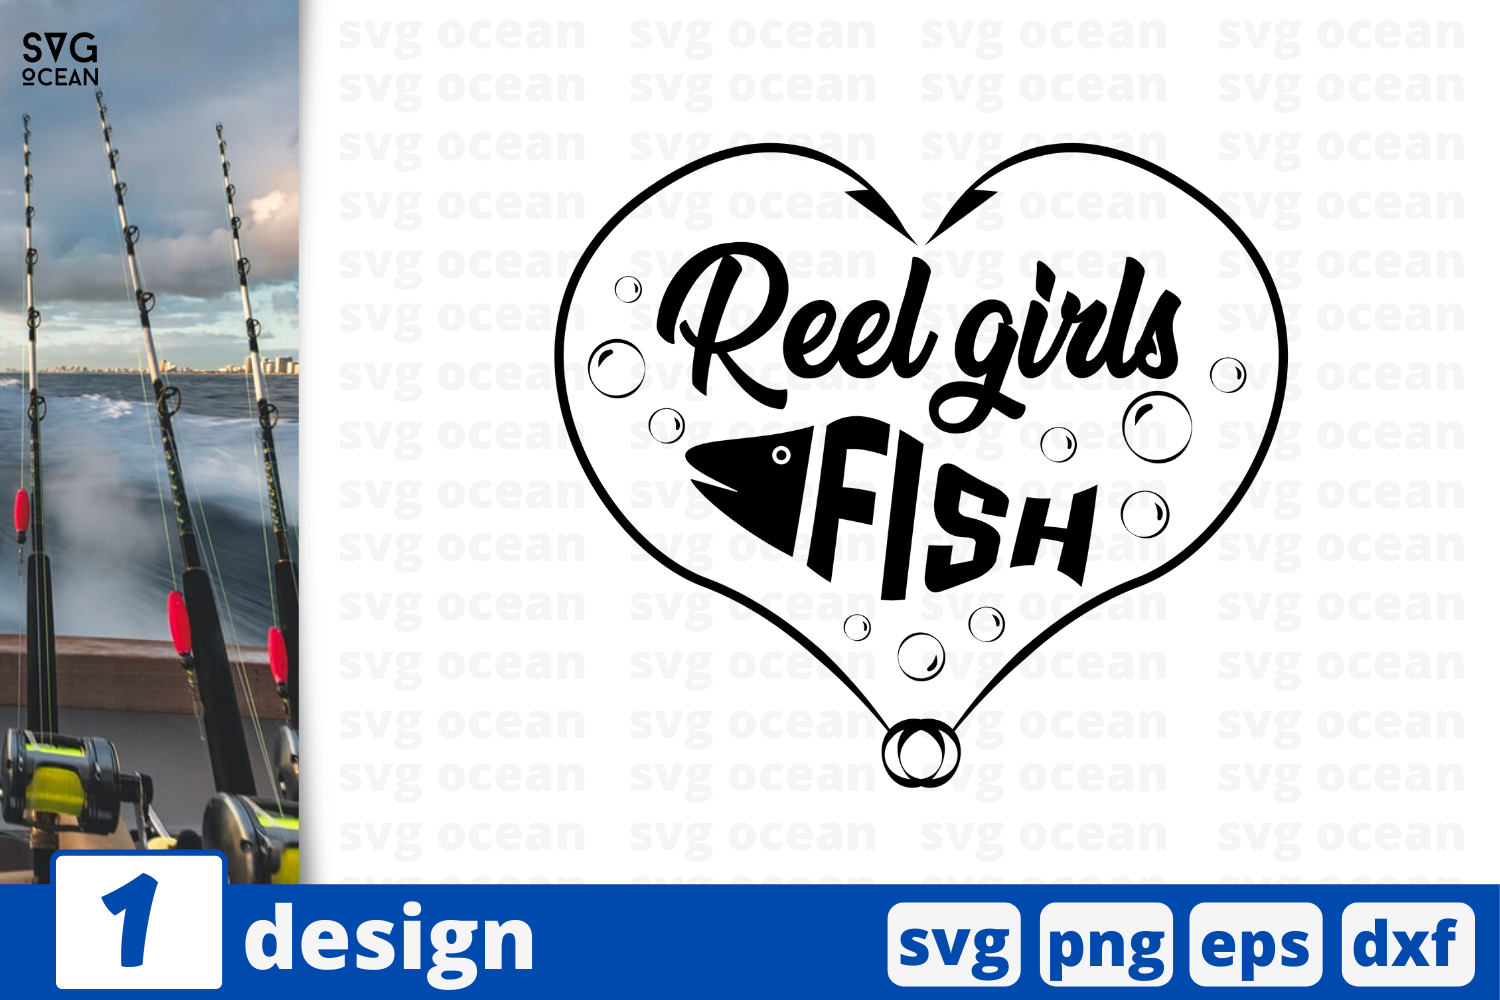 1 REAL GIRLS FISH svg bundle, quotes cricut svg By SvgOcean